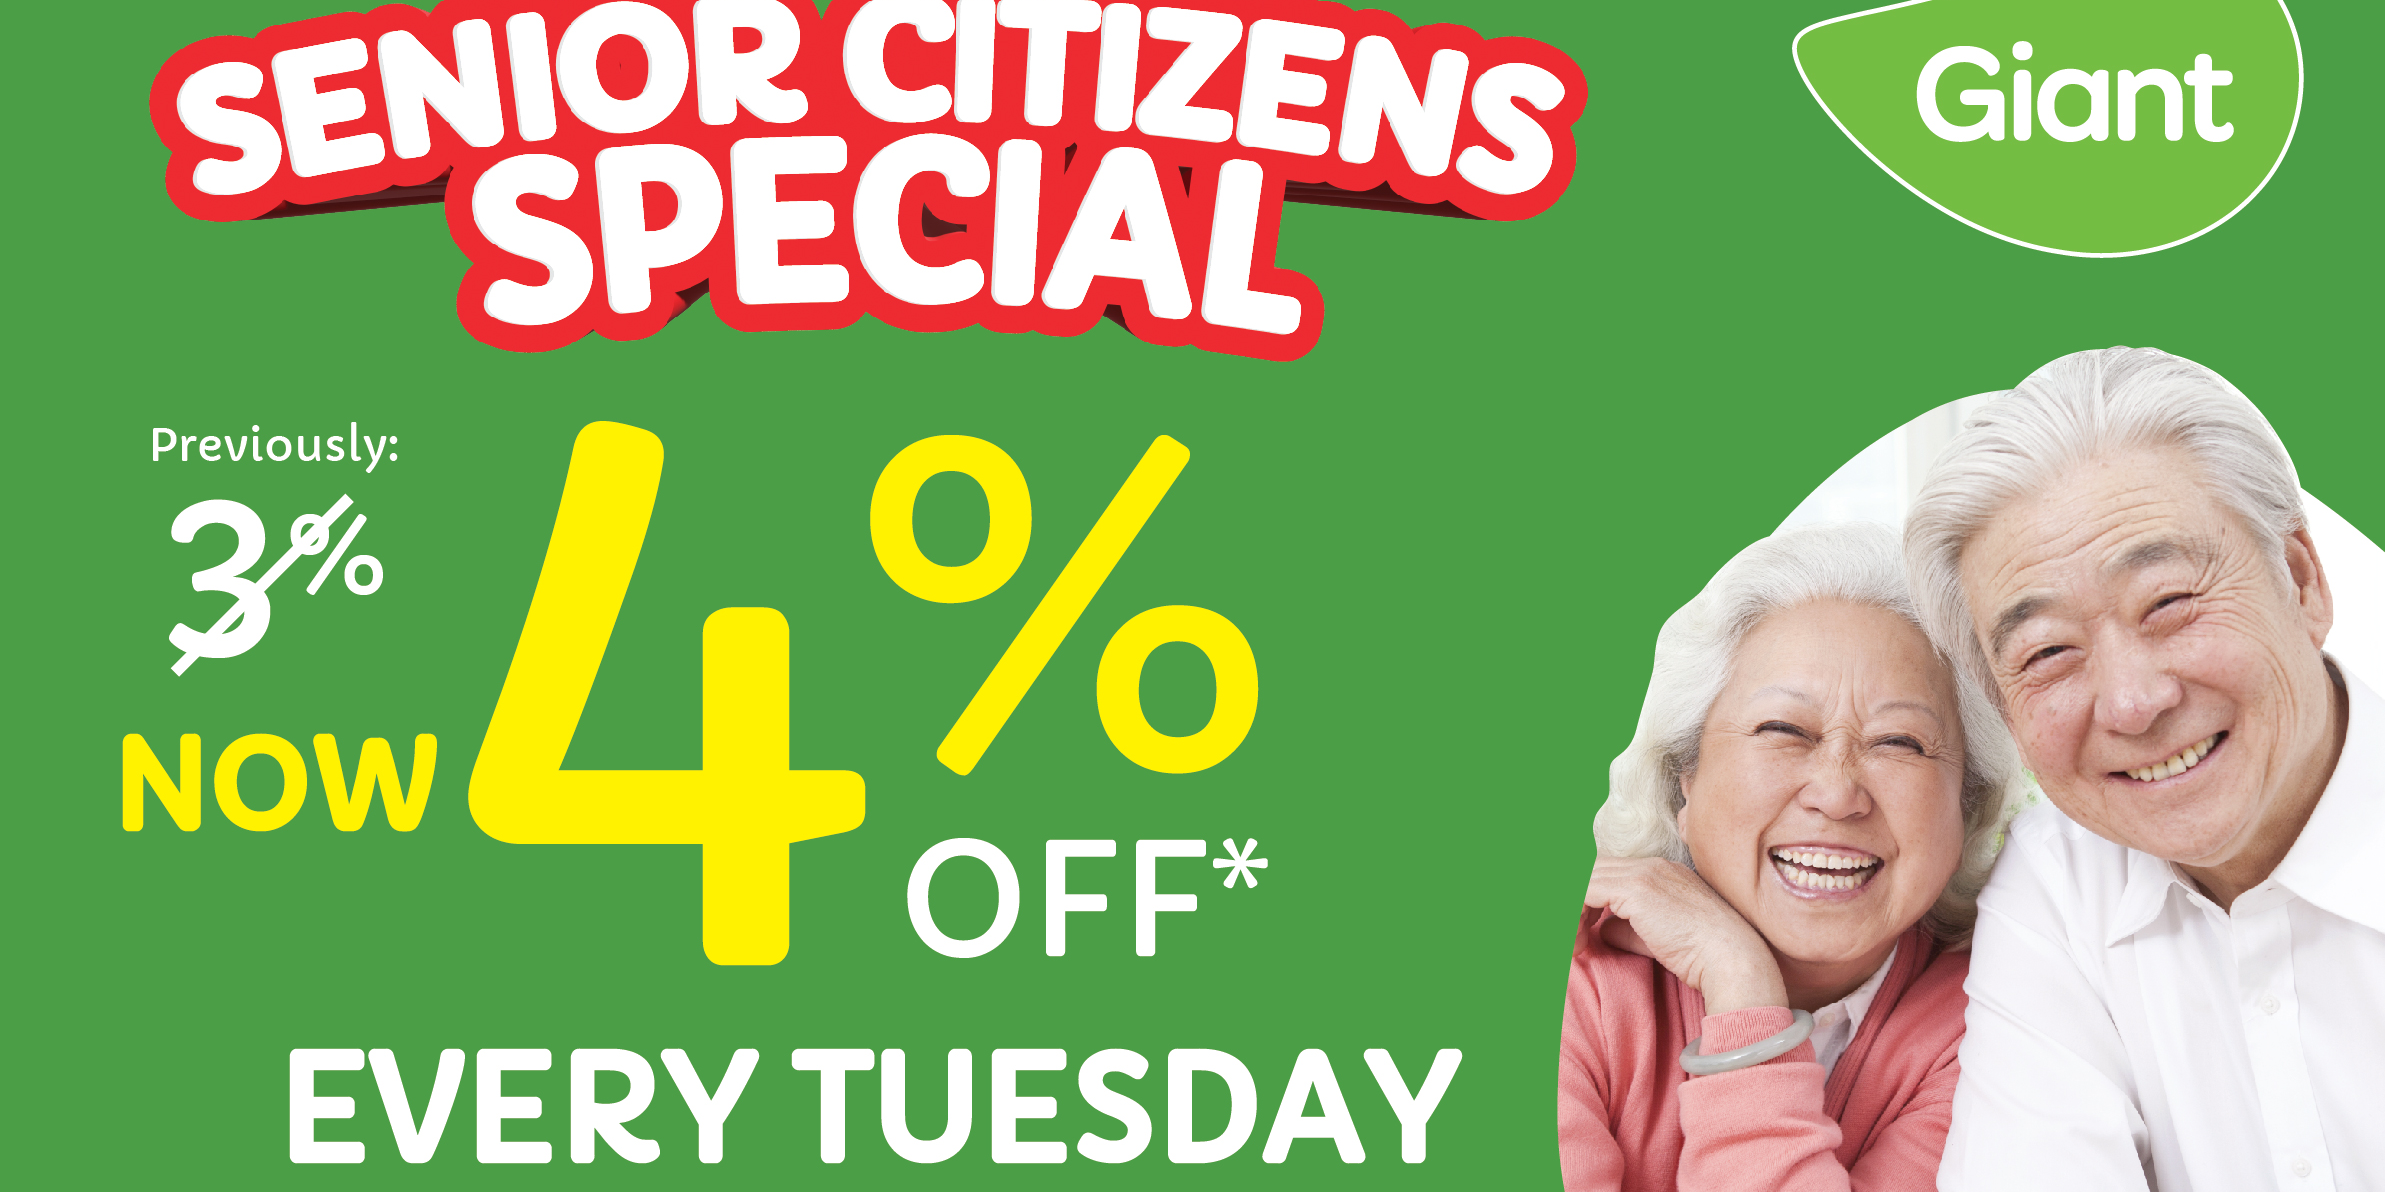 Giant Offers Upsized Senior Citizens Discount of 4%, available every Tuesday at Giant stores islandw